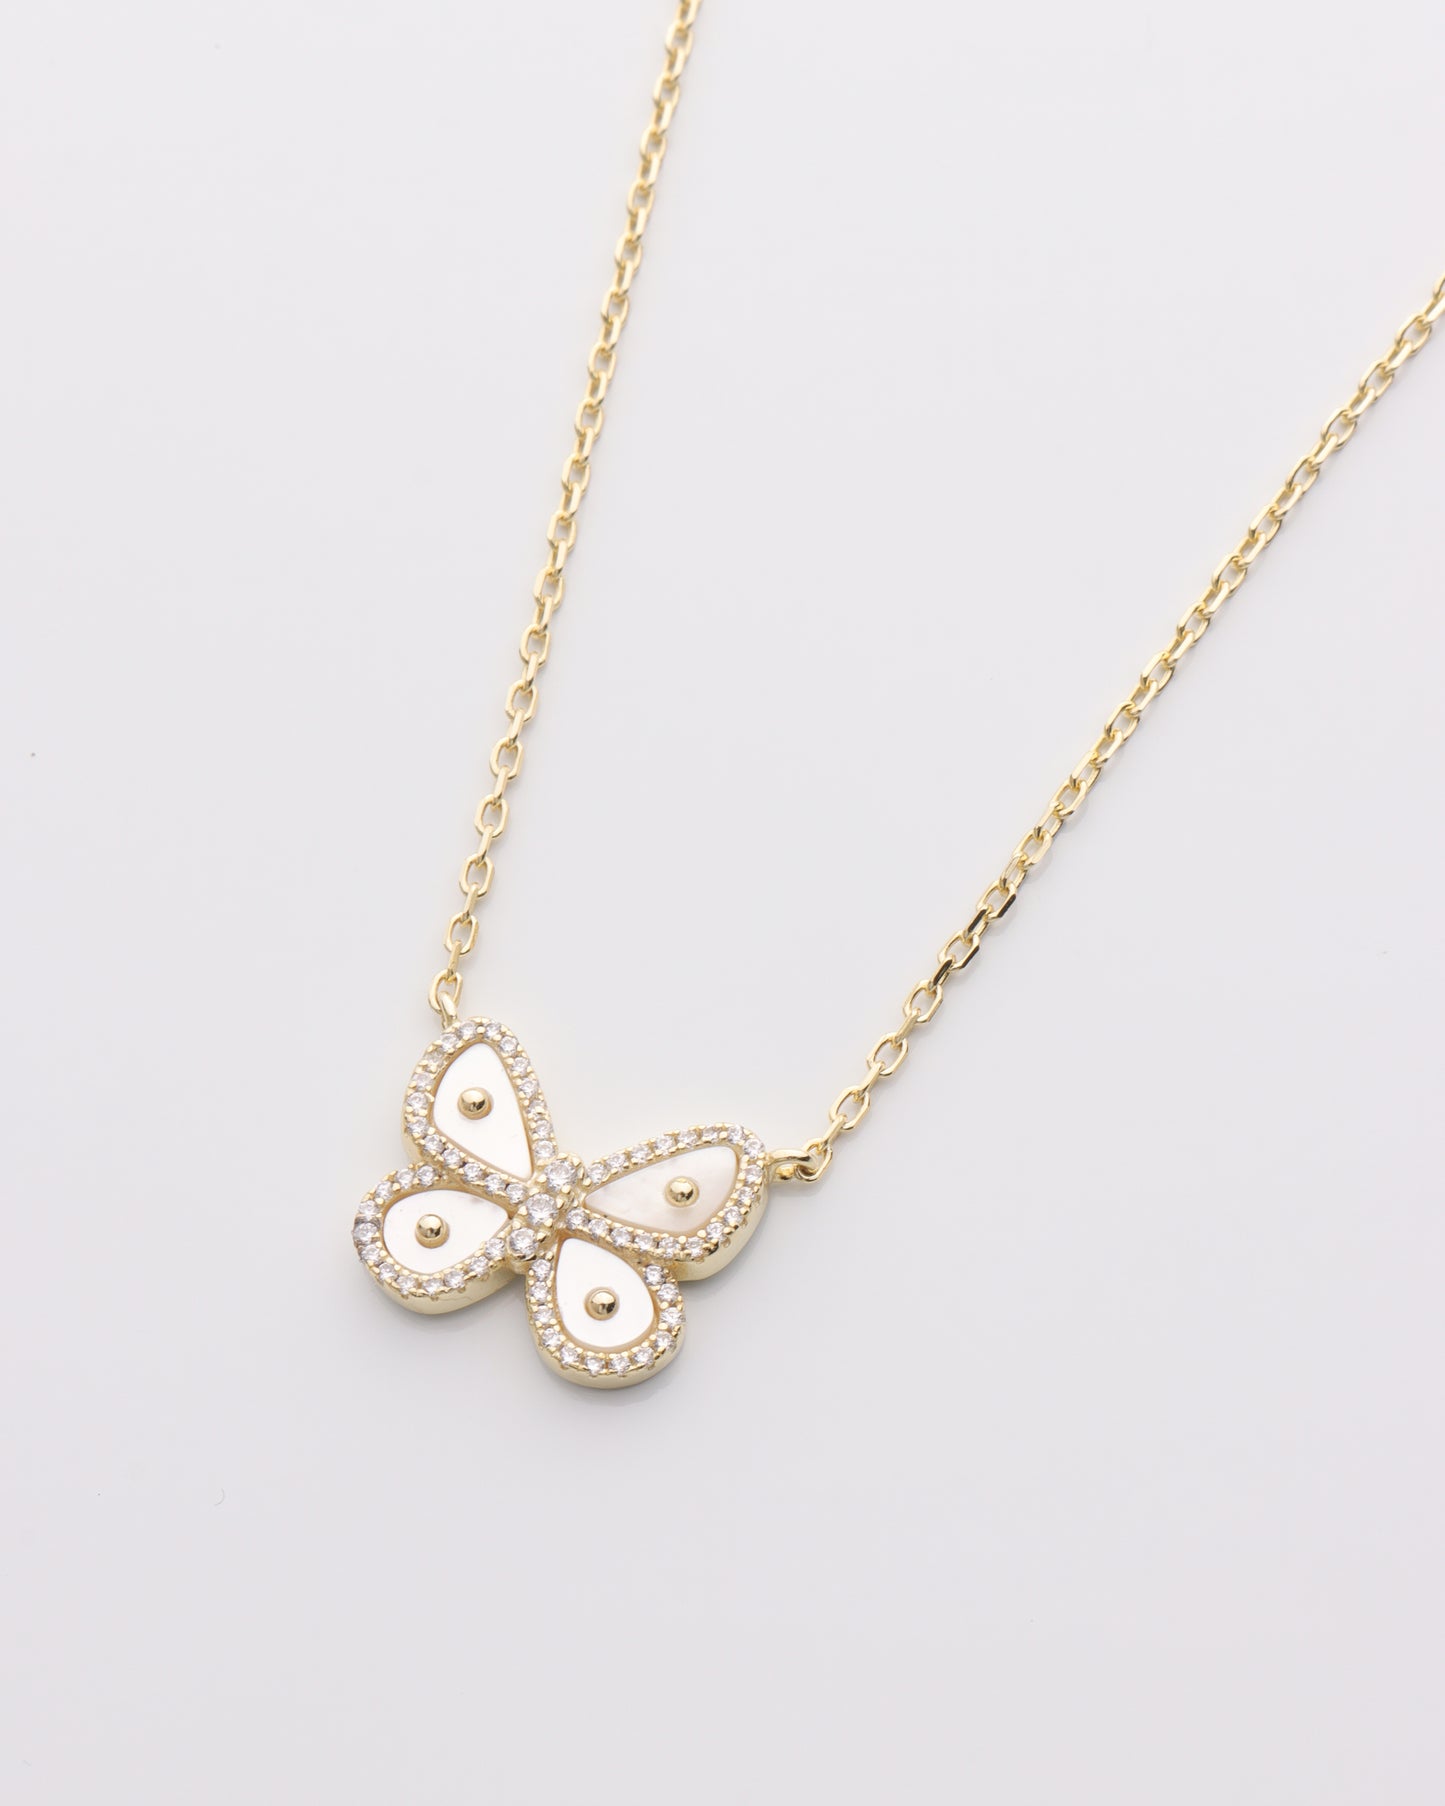 Mother of Pearl CZ Butterfly Necklace